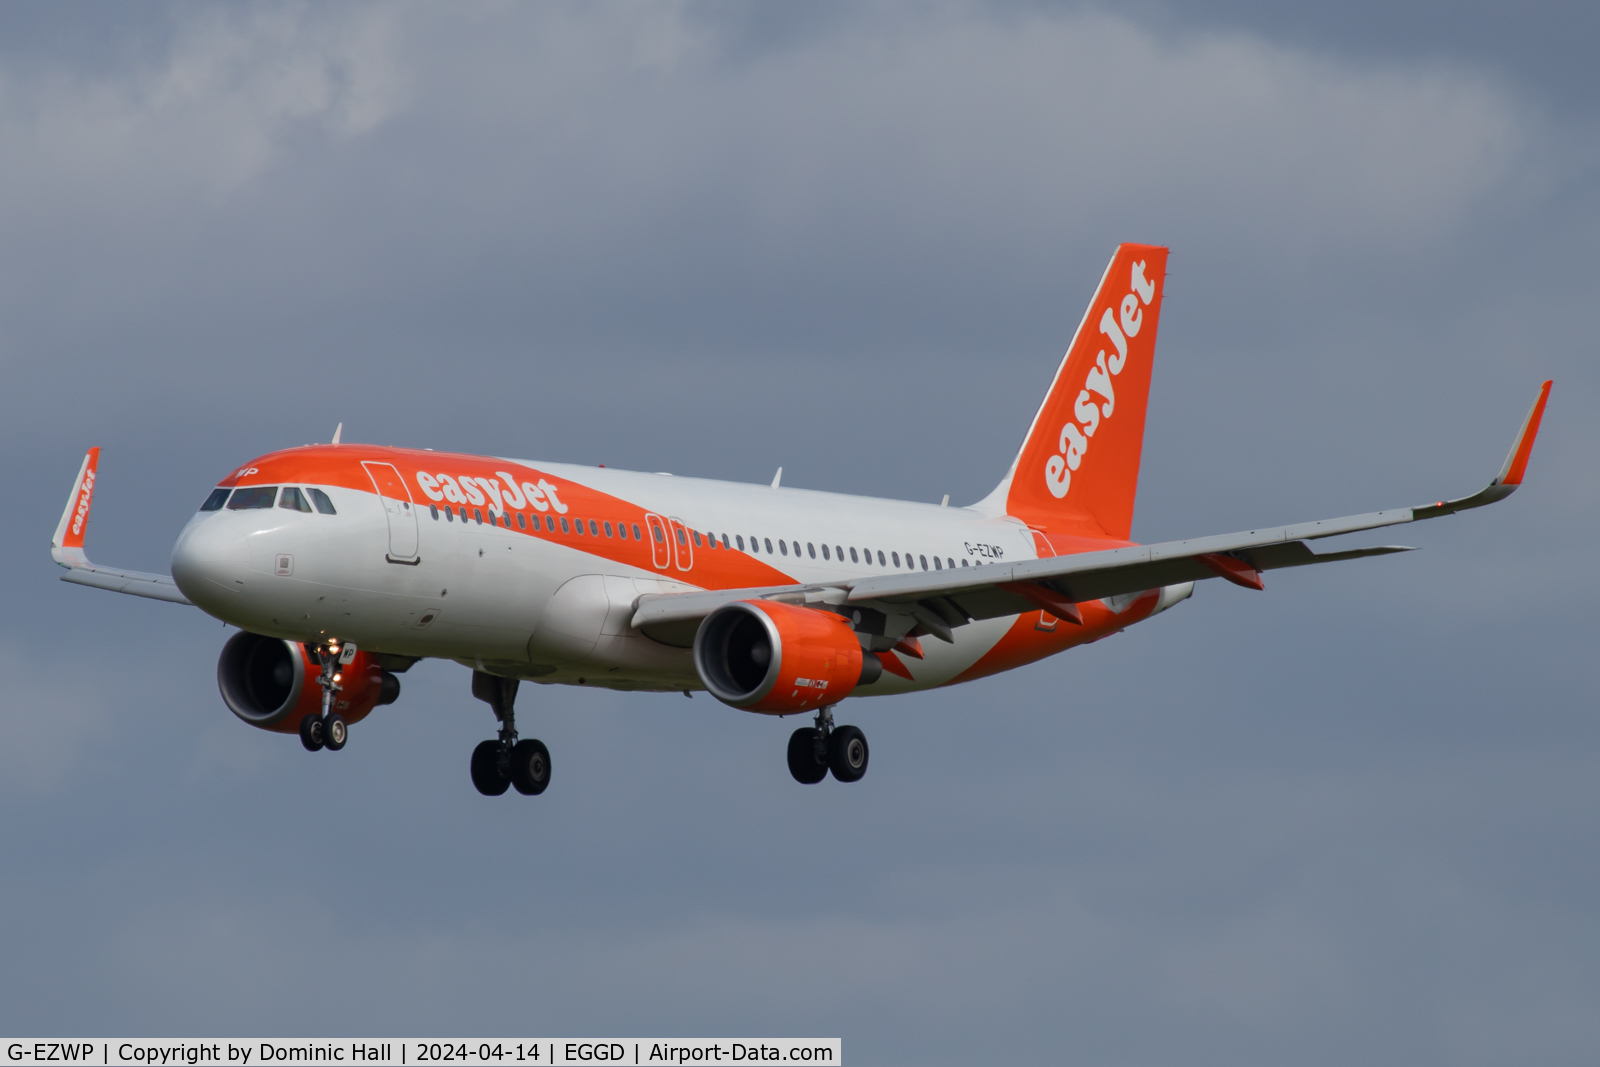 G-EZWP, 2013 Airbus A320-214 C/N 5927, BRS 14/04/24